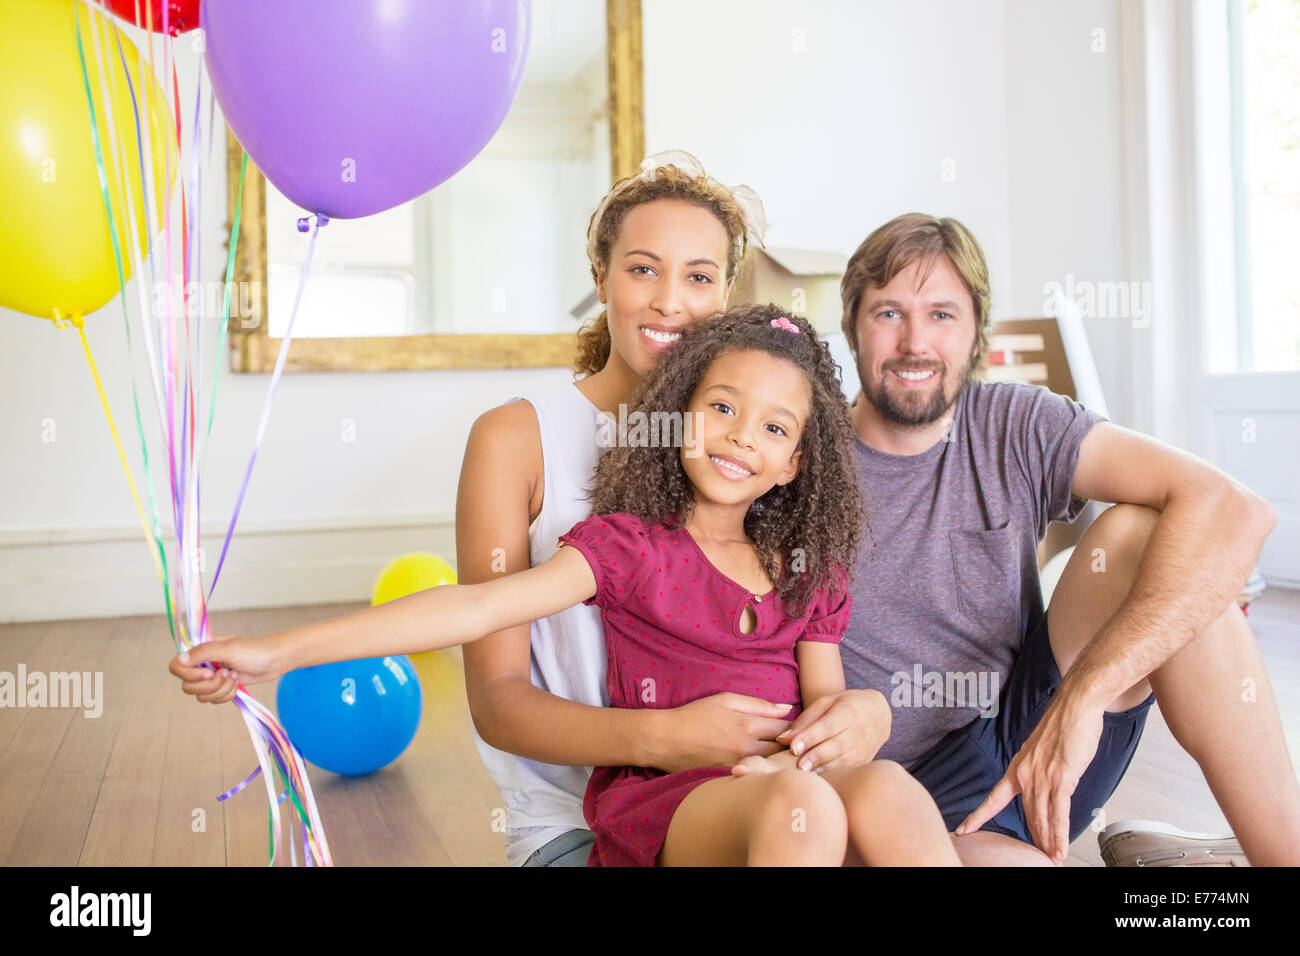 Family sitting in living space with balloons Stock Photo